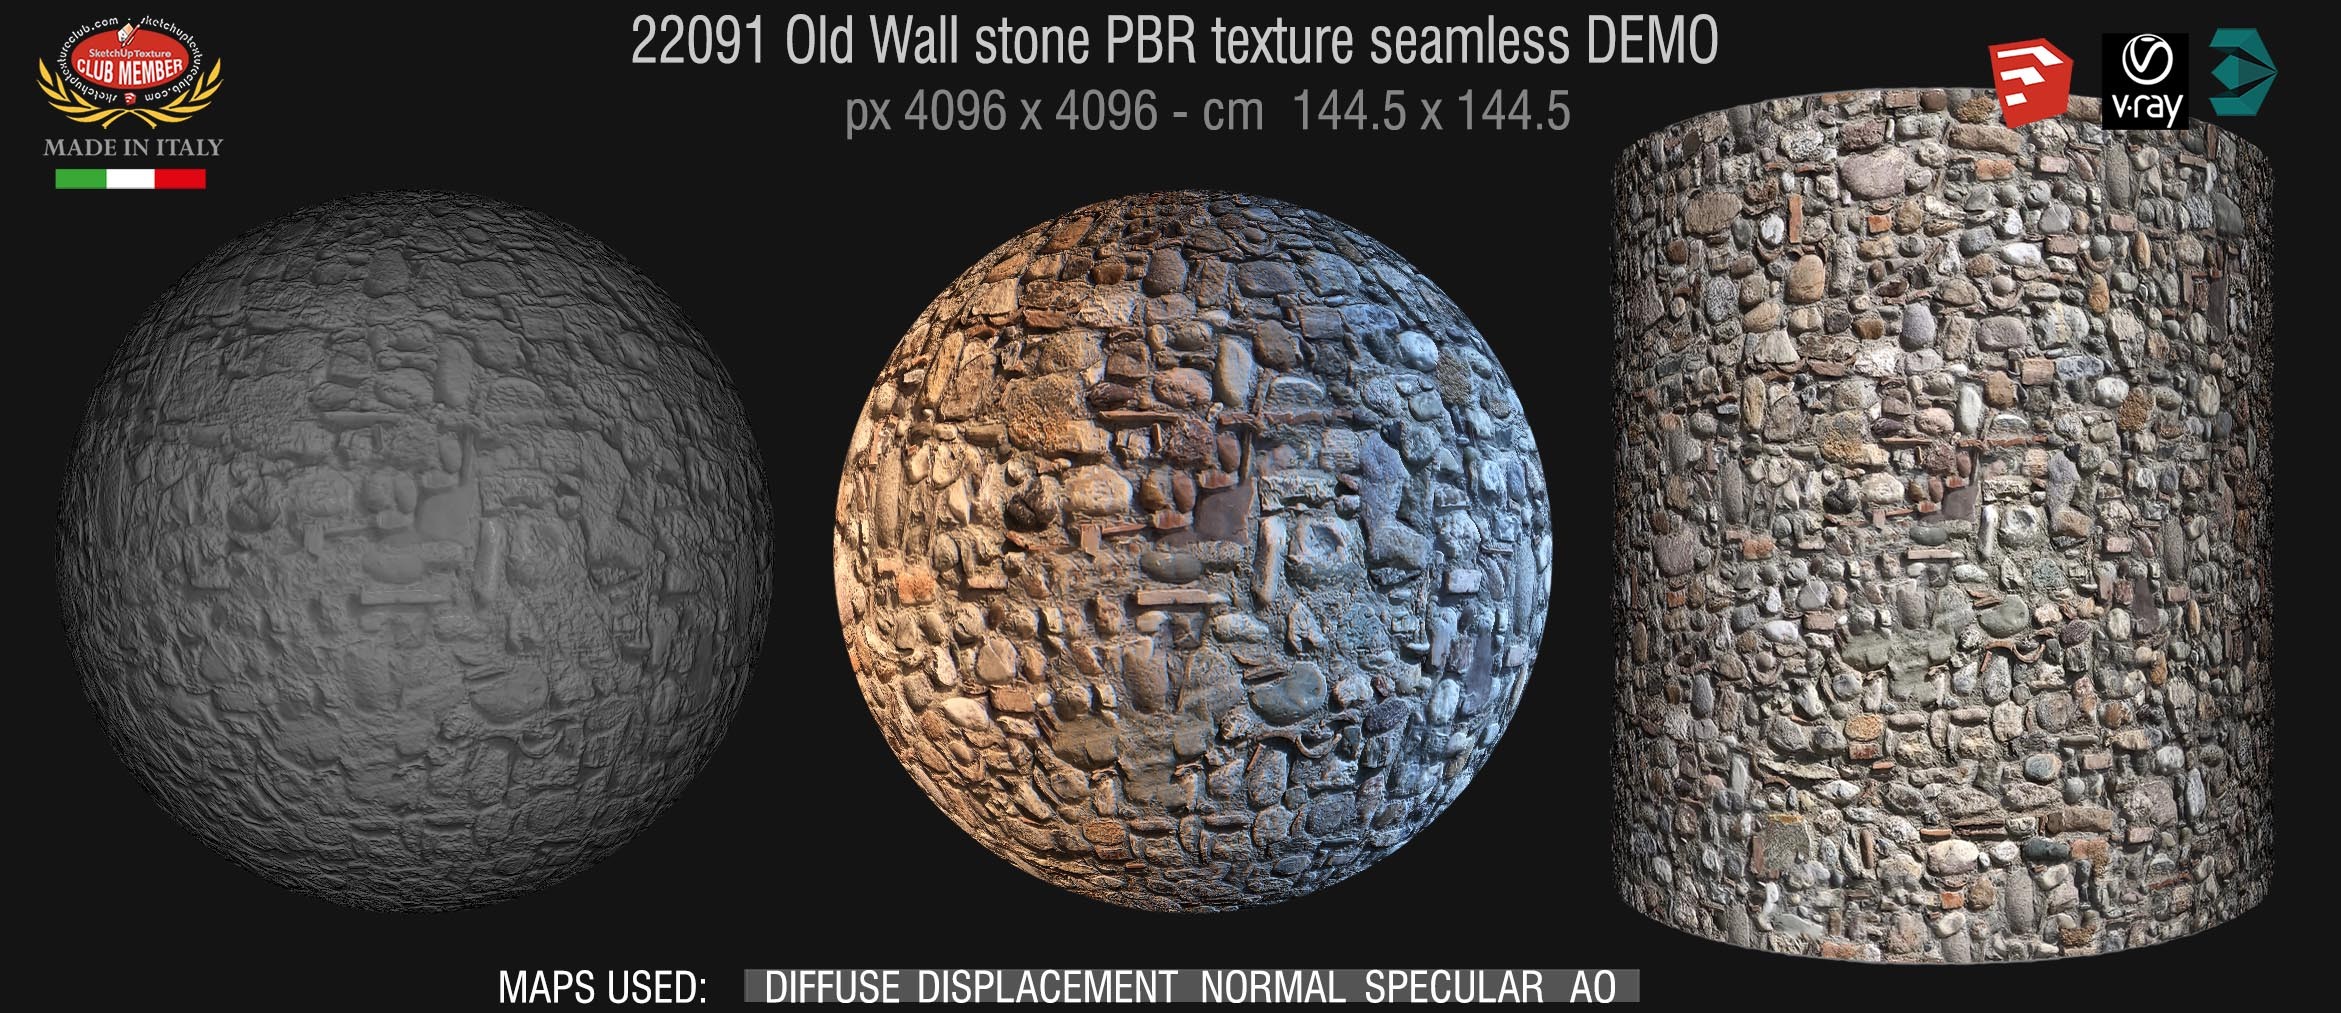 22091 Typical Italian old stone wall - PBR texture seamless DEMO